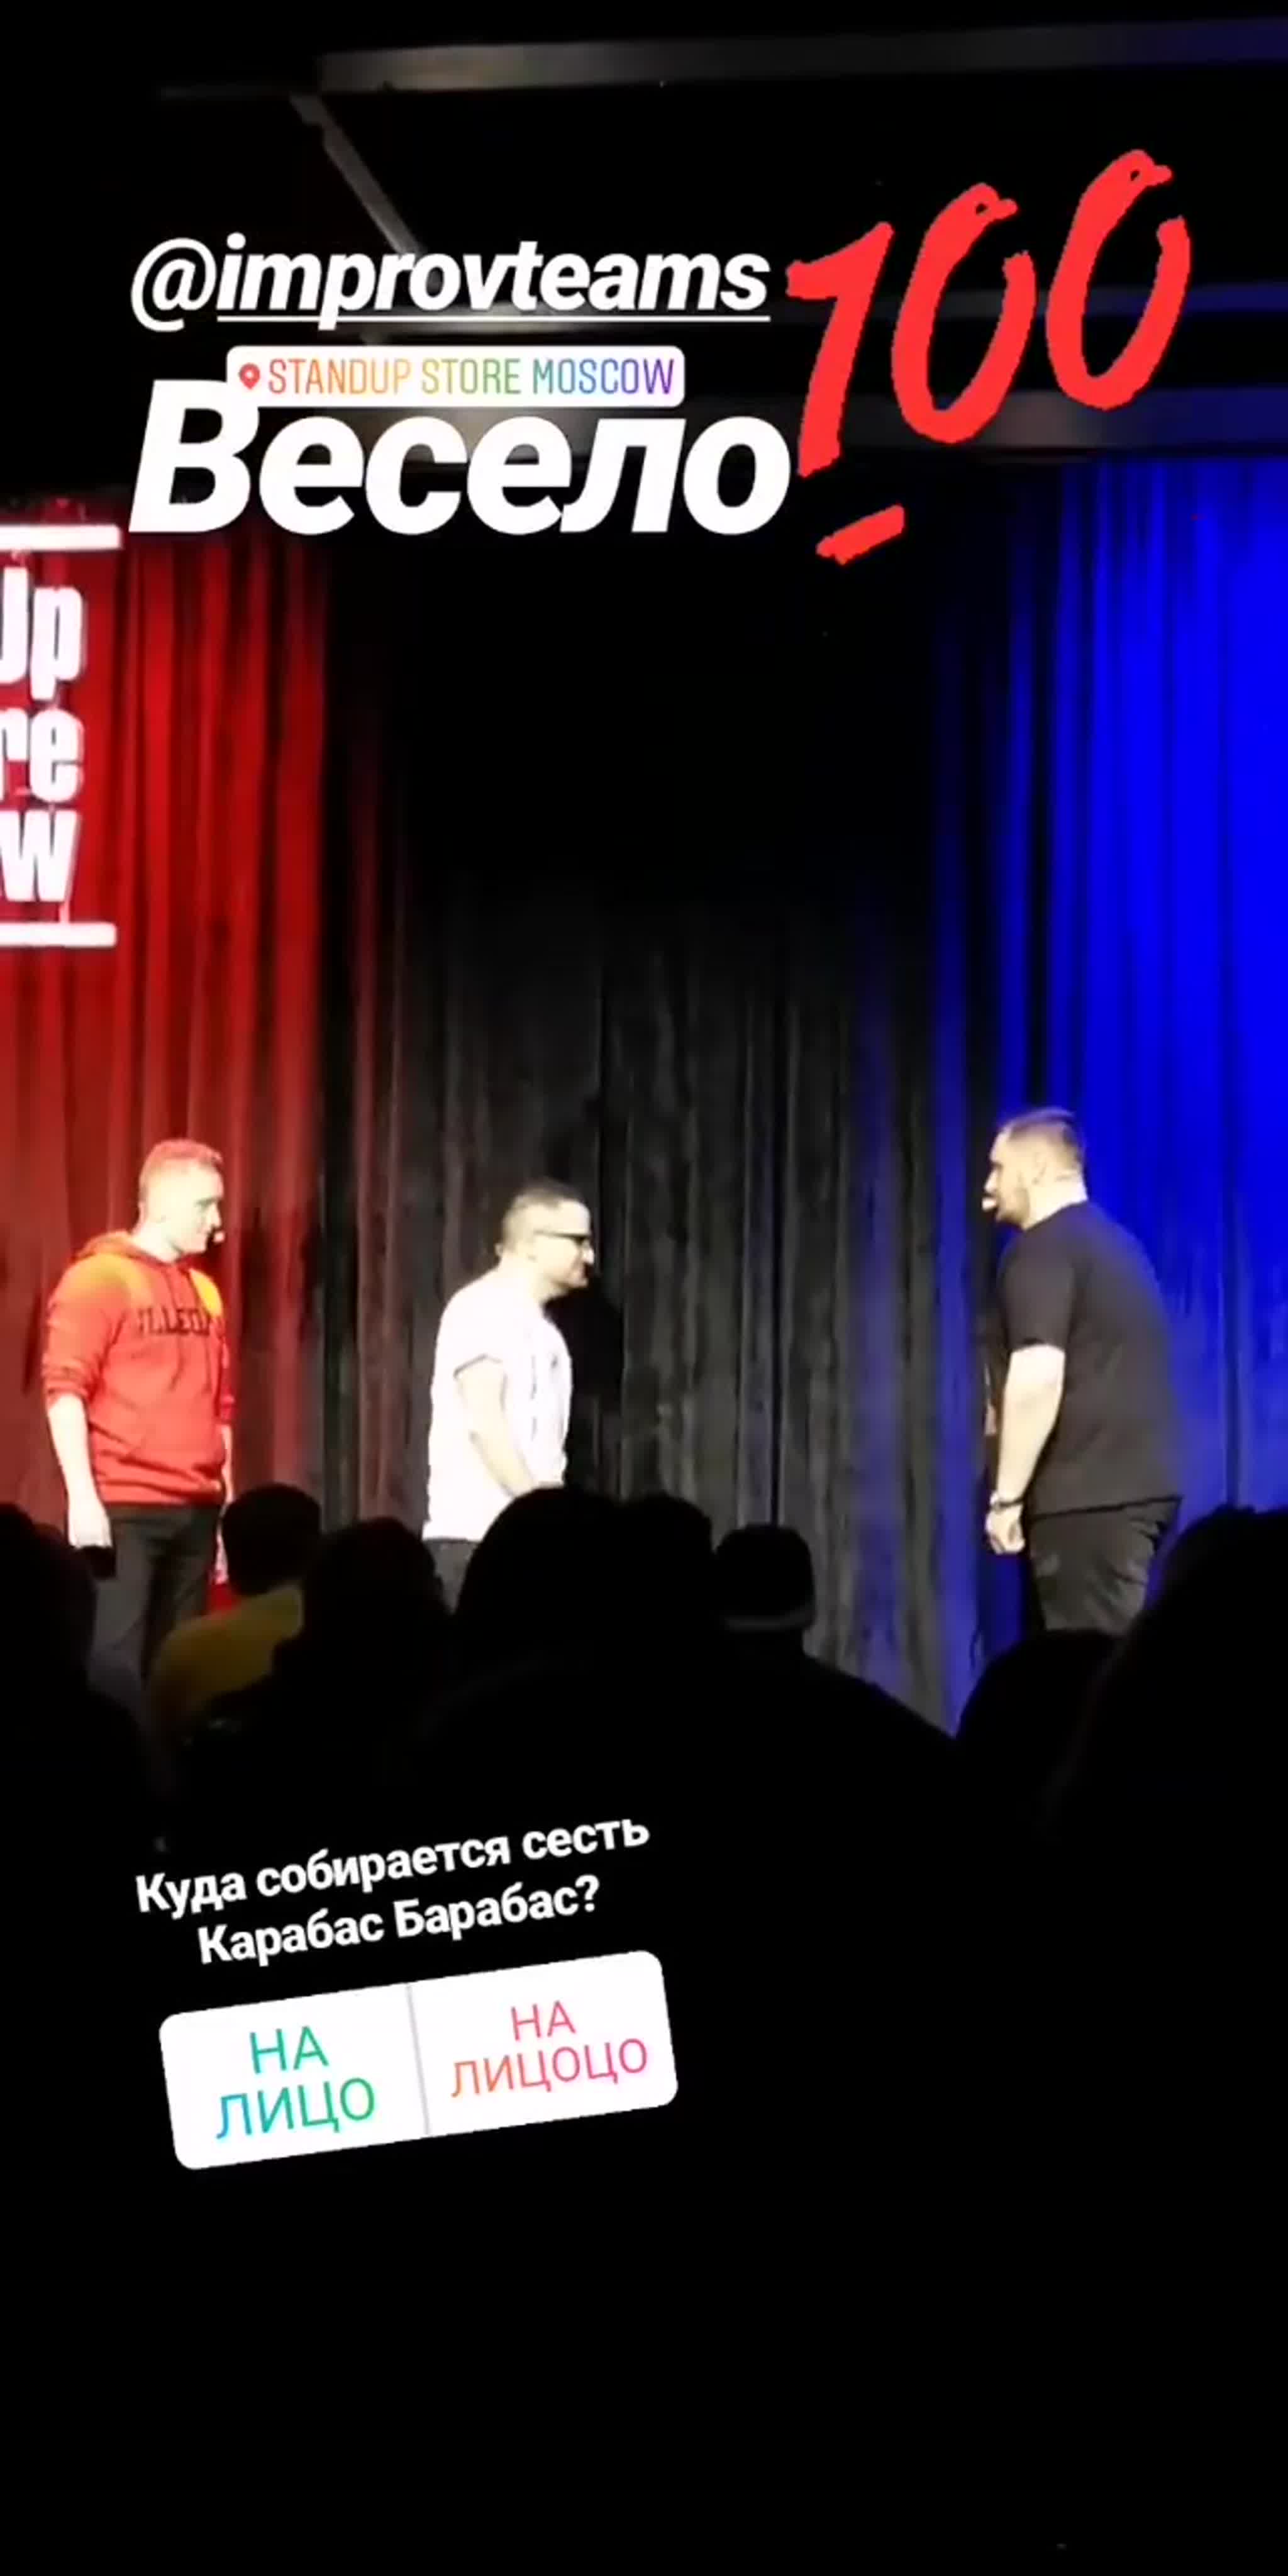 11.04.19 - StandUp Store Moscow